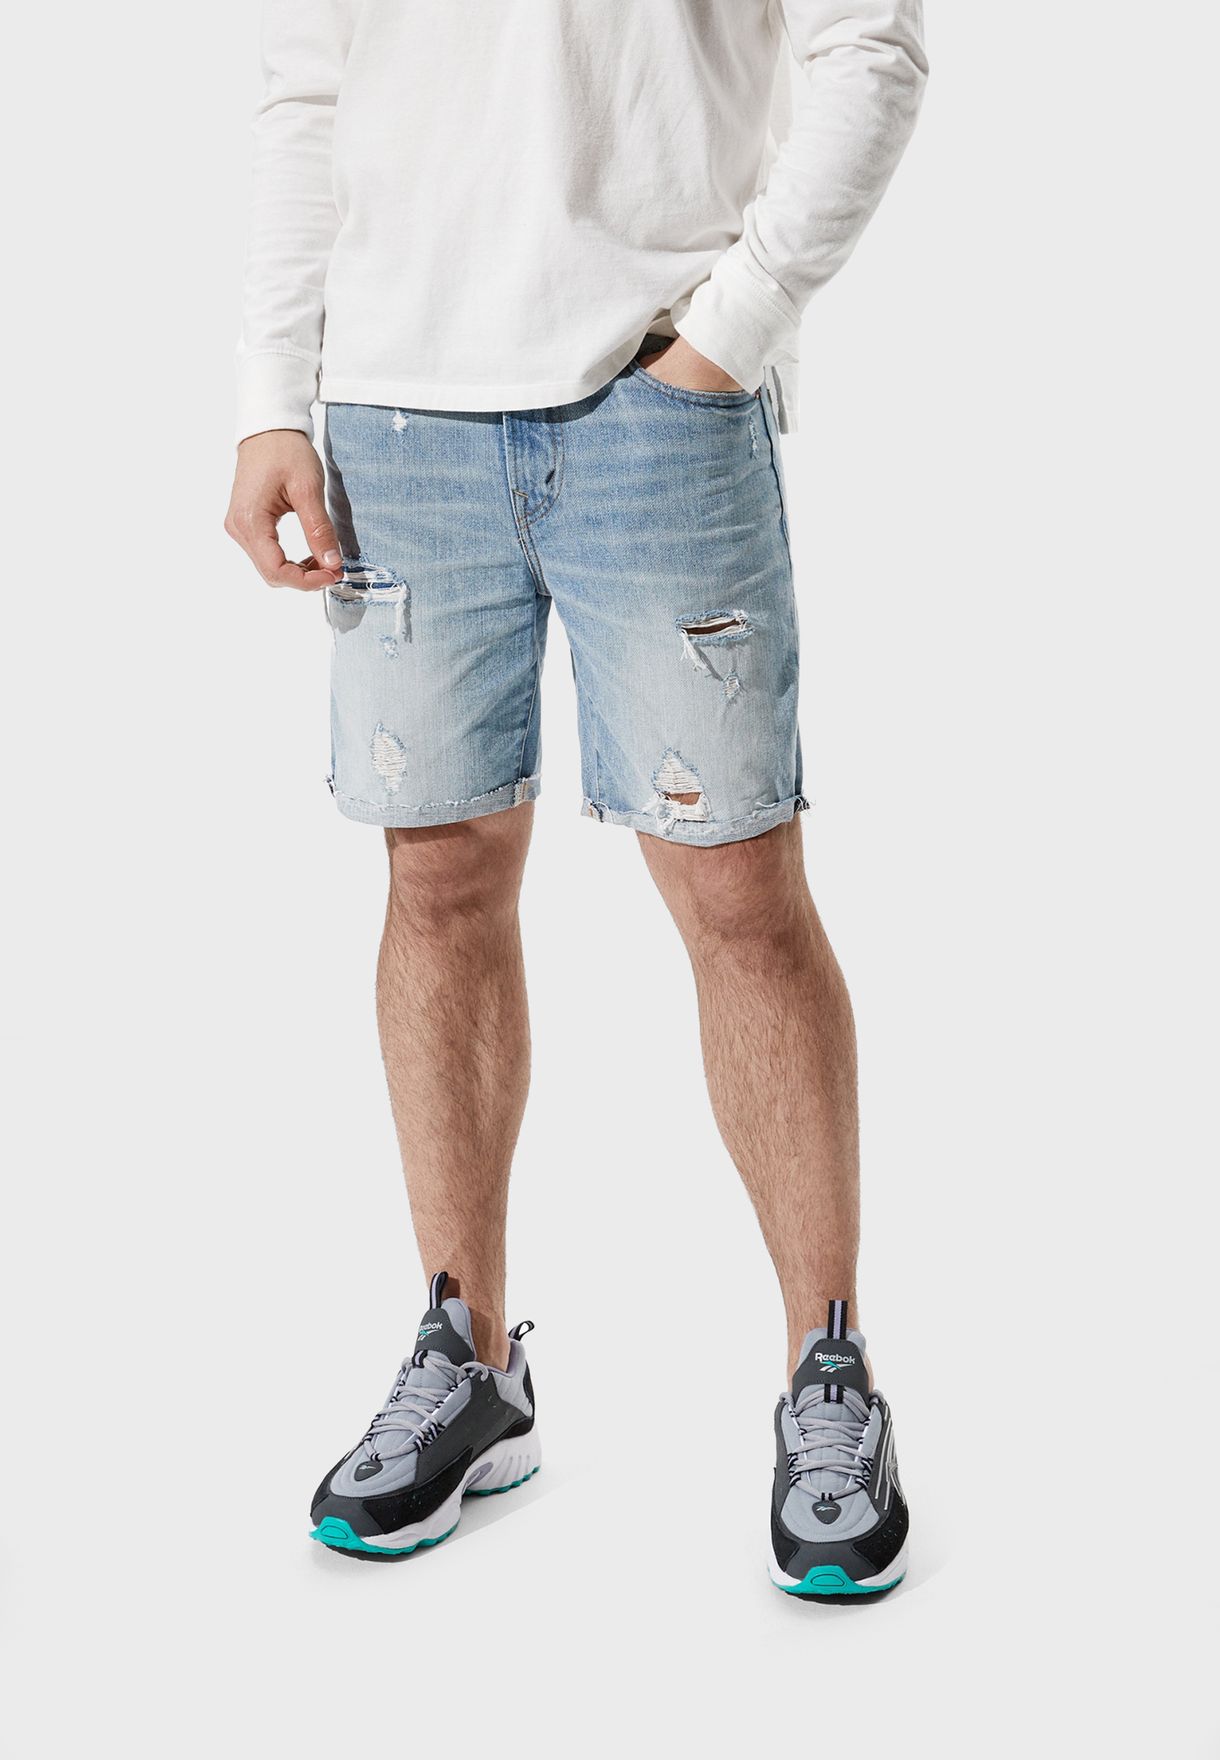 shoes with denim shorts